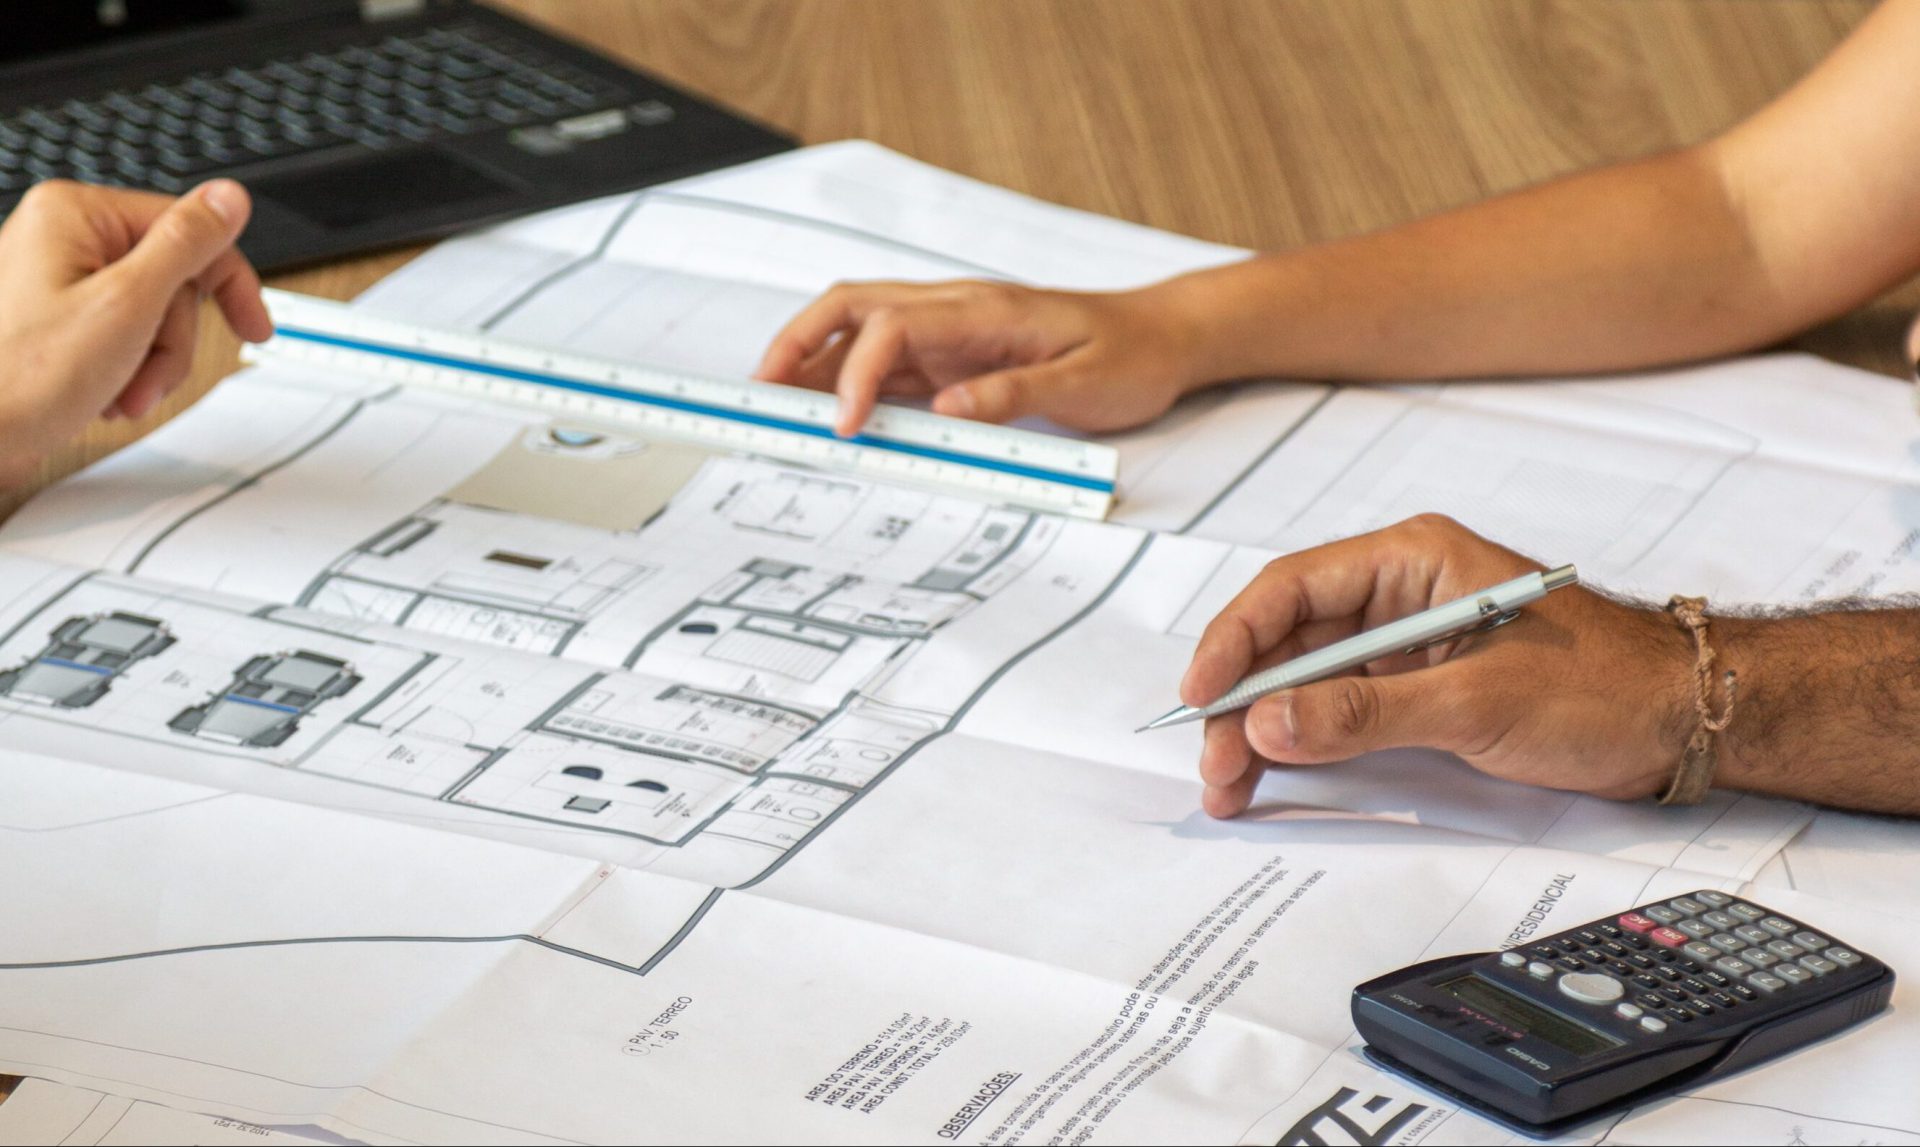 Floor plans on a wooden table with hands resting on top of it and a laptop in the background